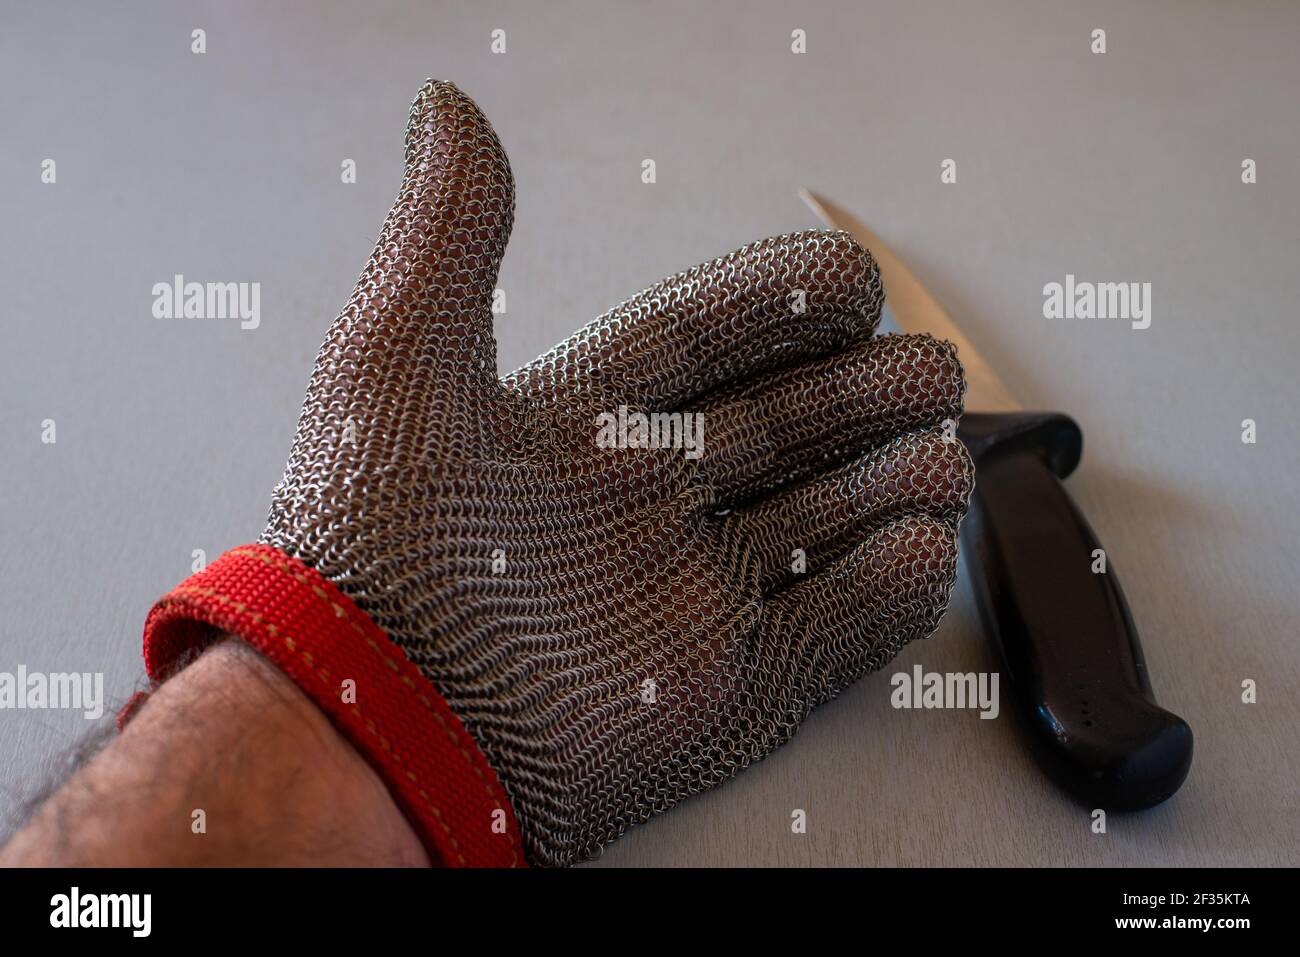 https://c8.alamy.com/comp/2F35KTA/metal-protective-glove-and-kitchen-knife-with-selective-focus-for-butchers-or-woodworking-2F35KTA.jpg